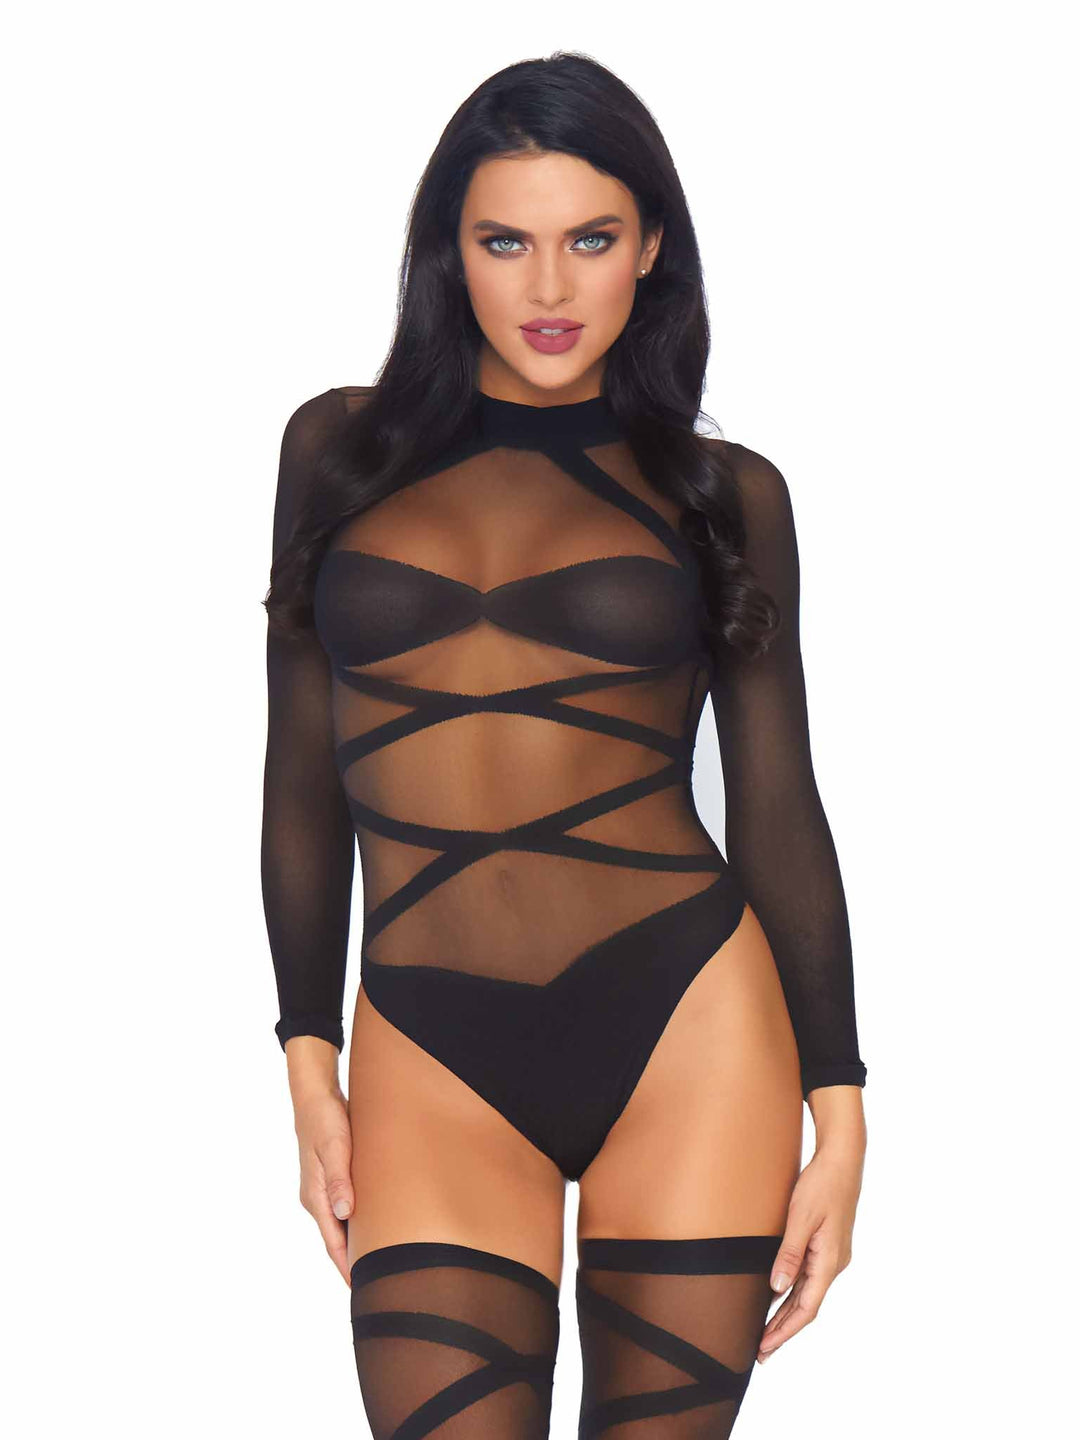 Sheer Bodysuit with Opaque Pattern and Sheer Stockings with Opaque Pattern